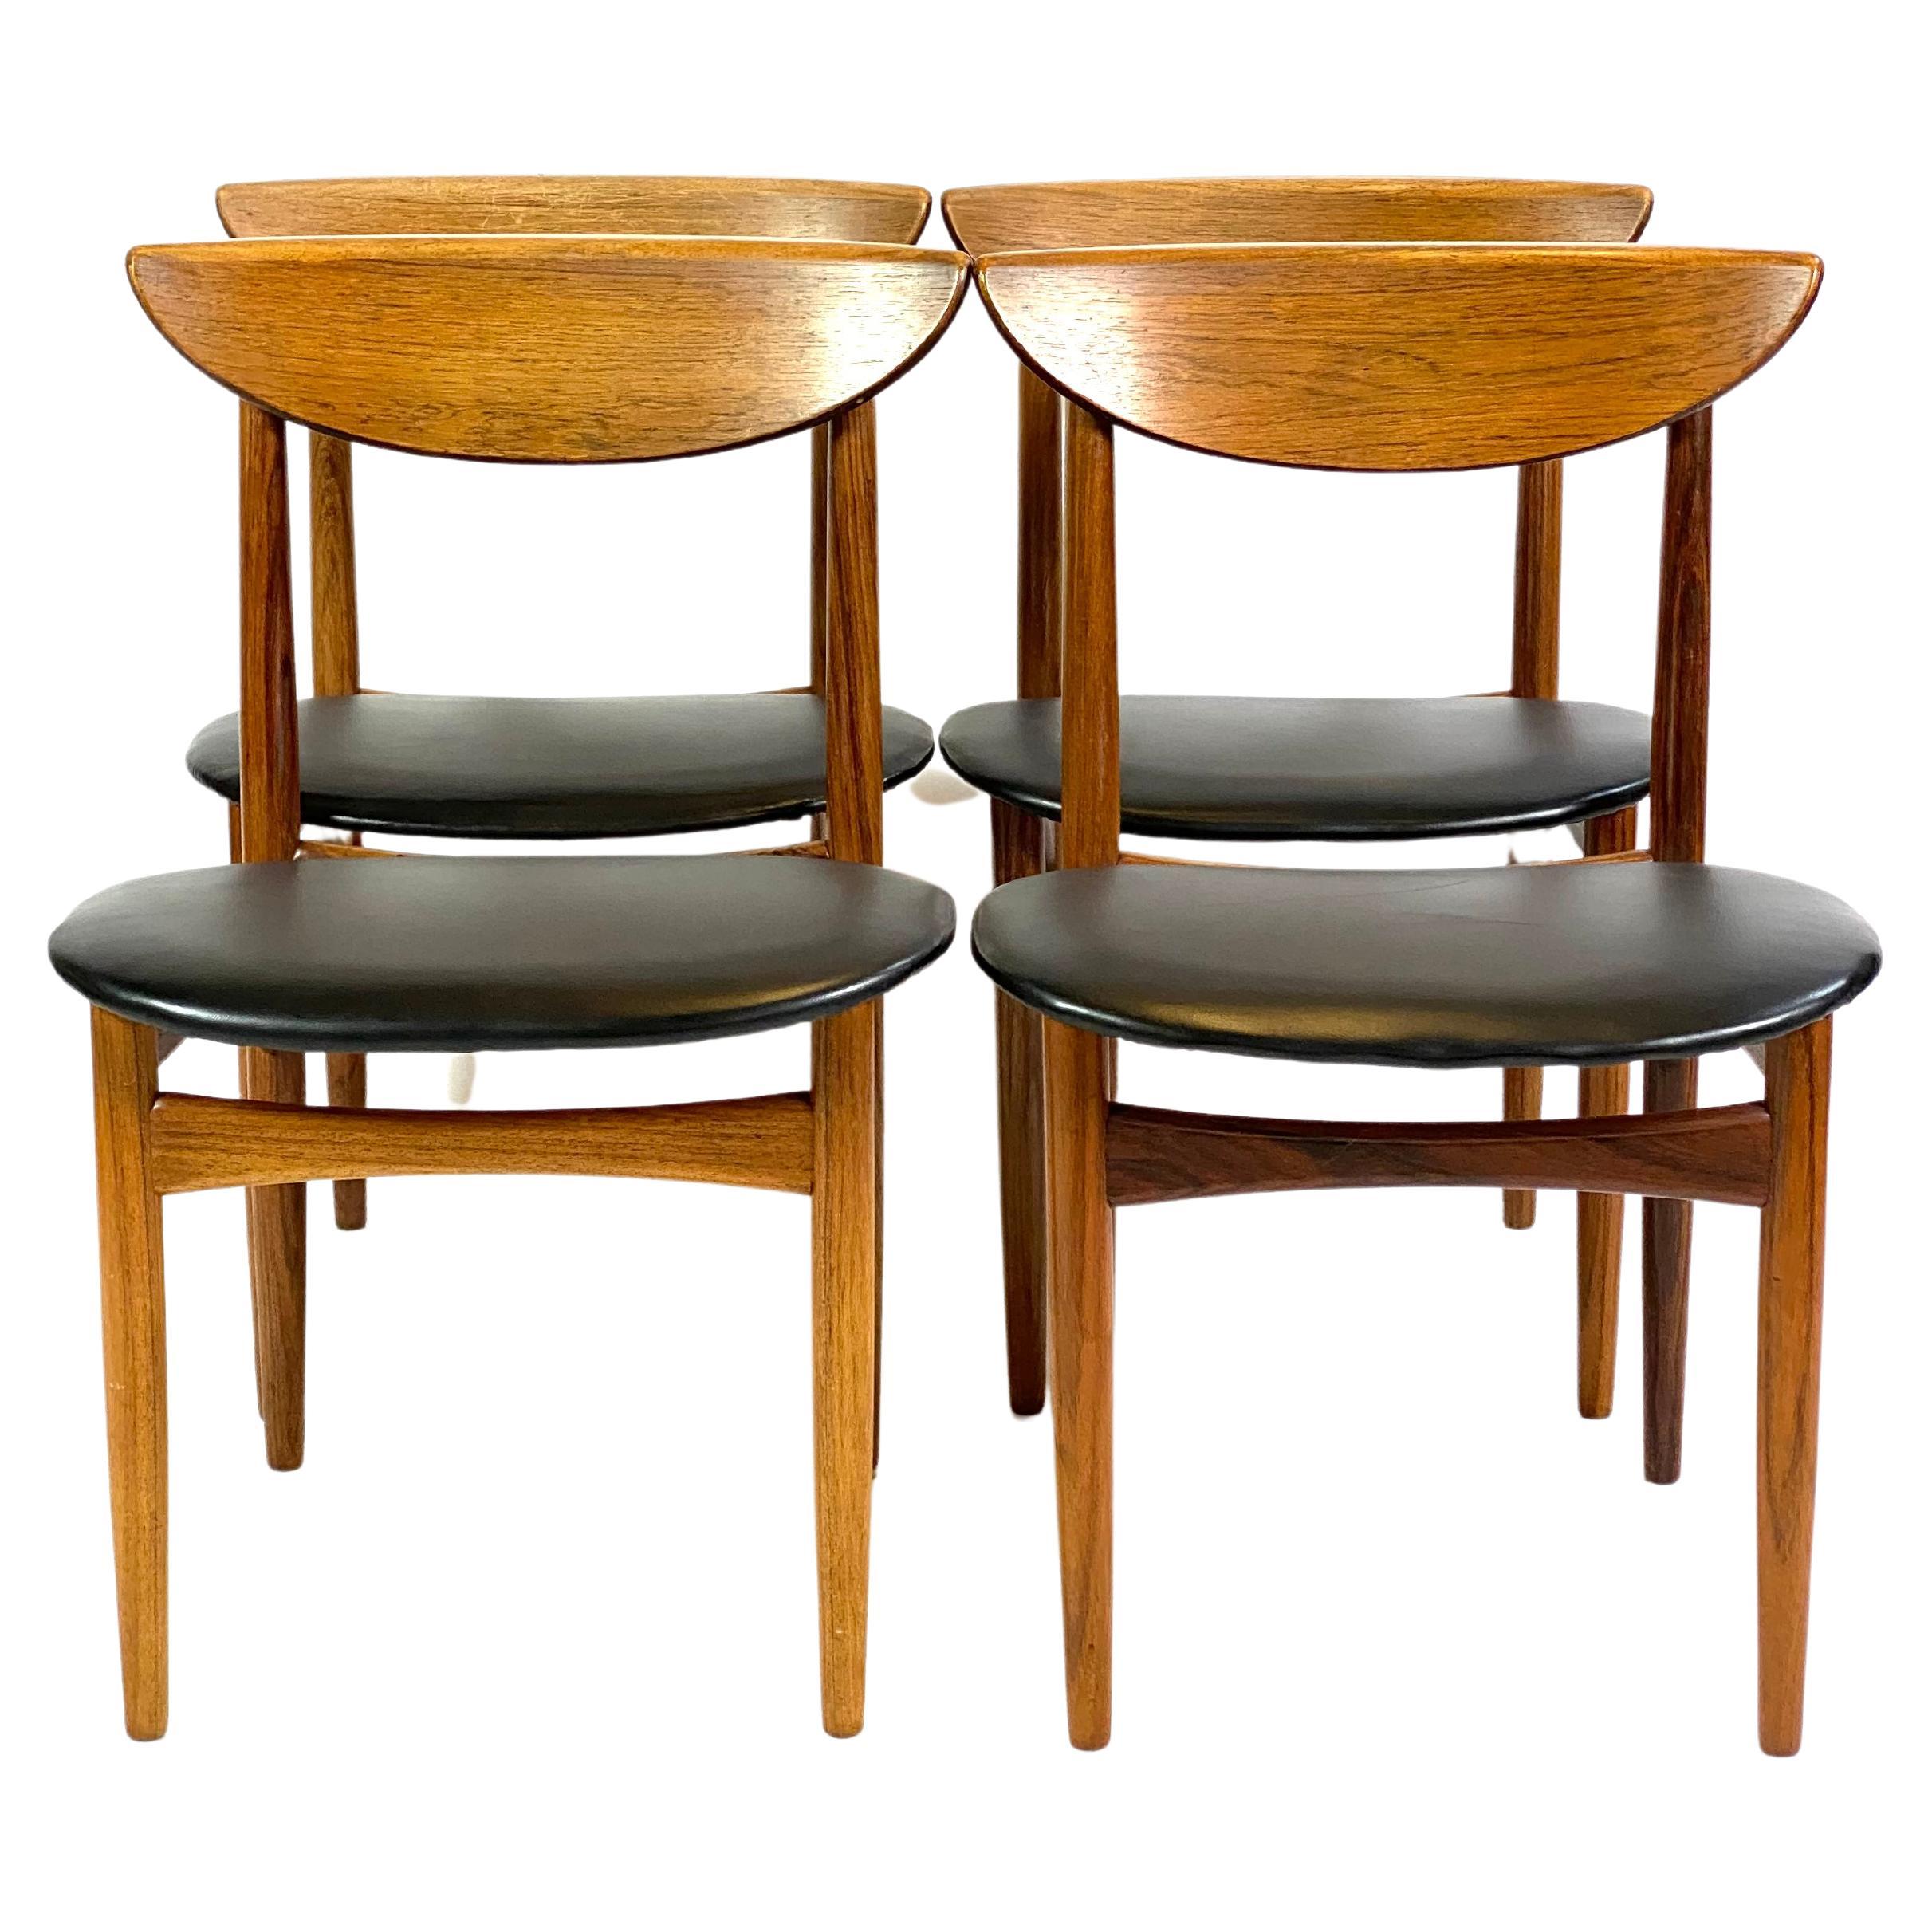 Four Dining Room Chairs in Rosewood of Danish Design, 1960s